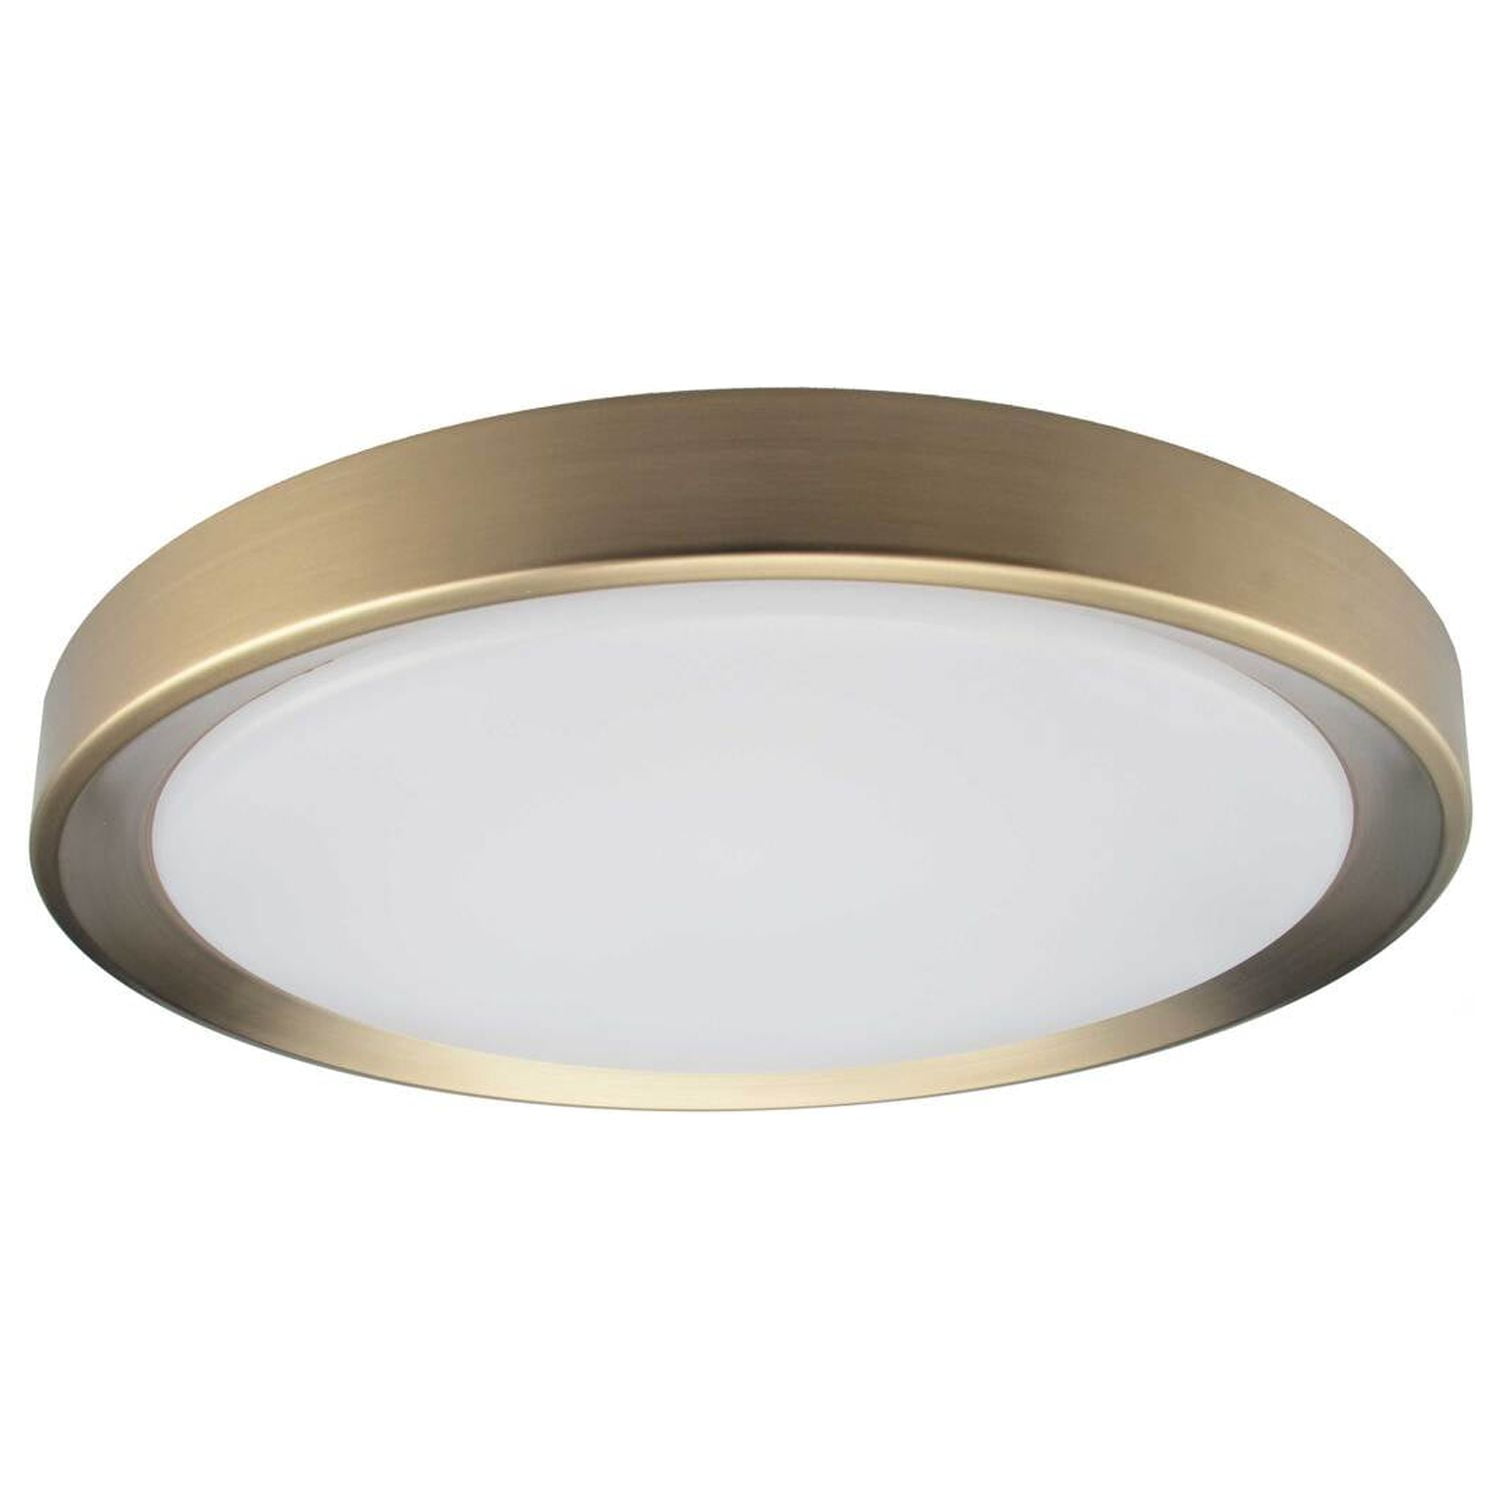 Picture of Dainolite FYN-1224LEDFH-AGB 24W Flush Mount&#44; Aged Brass with White Diffuser - 2 x 11.75 x 11.75 in.